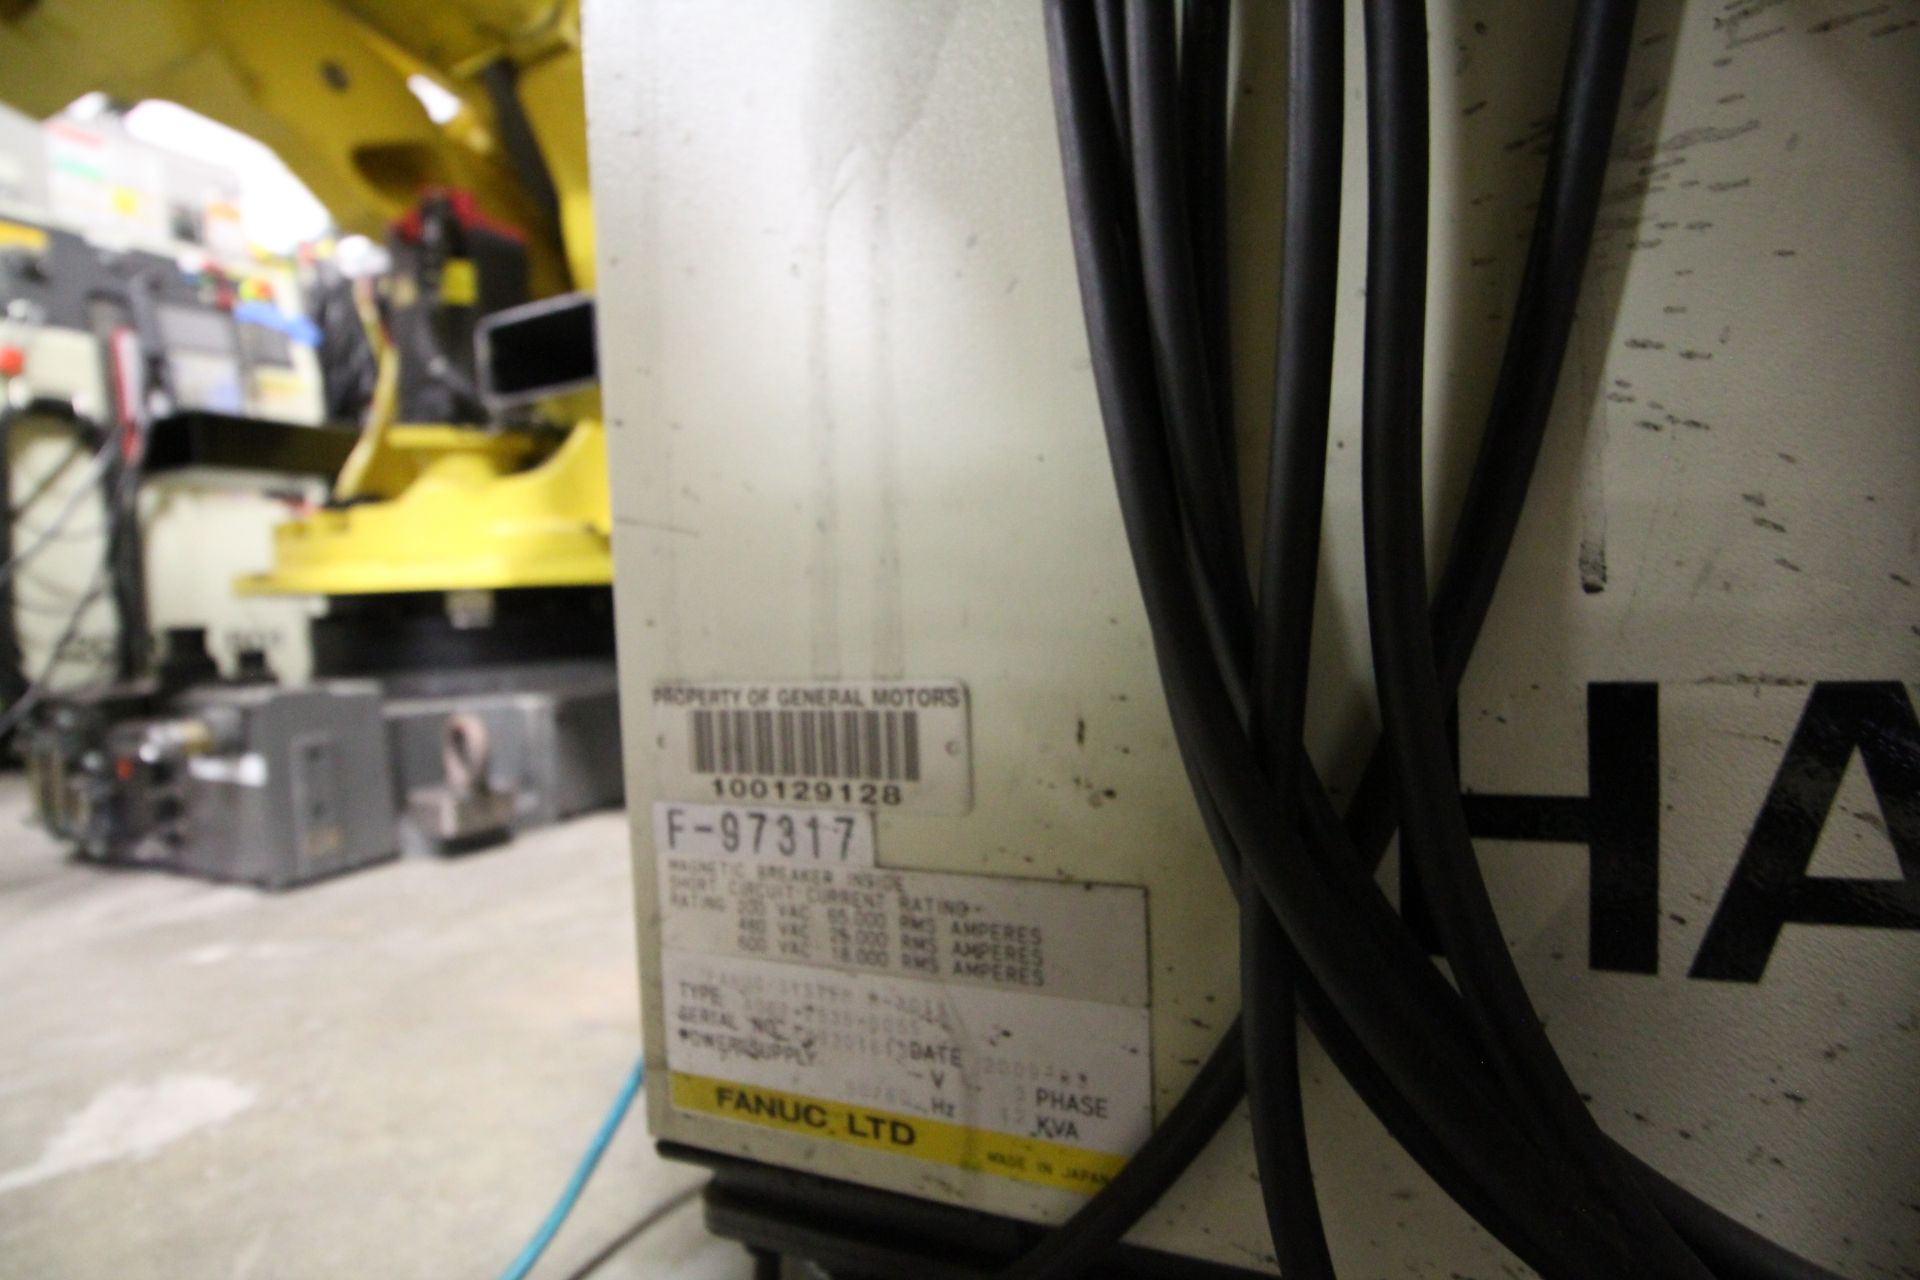 FANUC ROBOT R-2000iB/210F WITH R-30iA CONTROL, CABLES & TEACH PENDANT, SN 97317, YEAR 2009 - Image 7 of 8